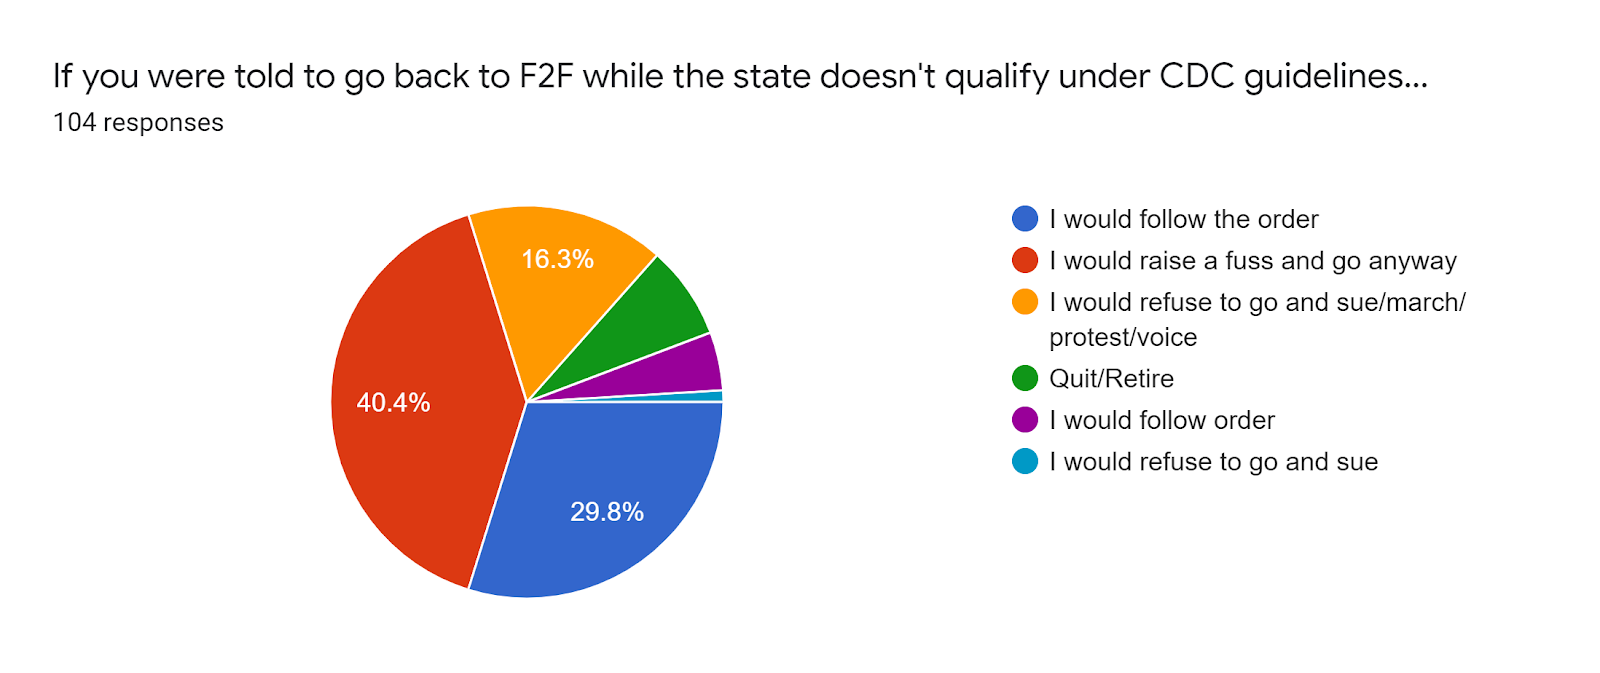 Forms response chart. Question title: If you were told to go back to F2F while the state doesn't qualify under CDC guidelines.... Number of responses: 104 responses.